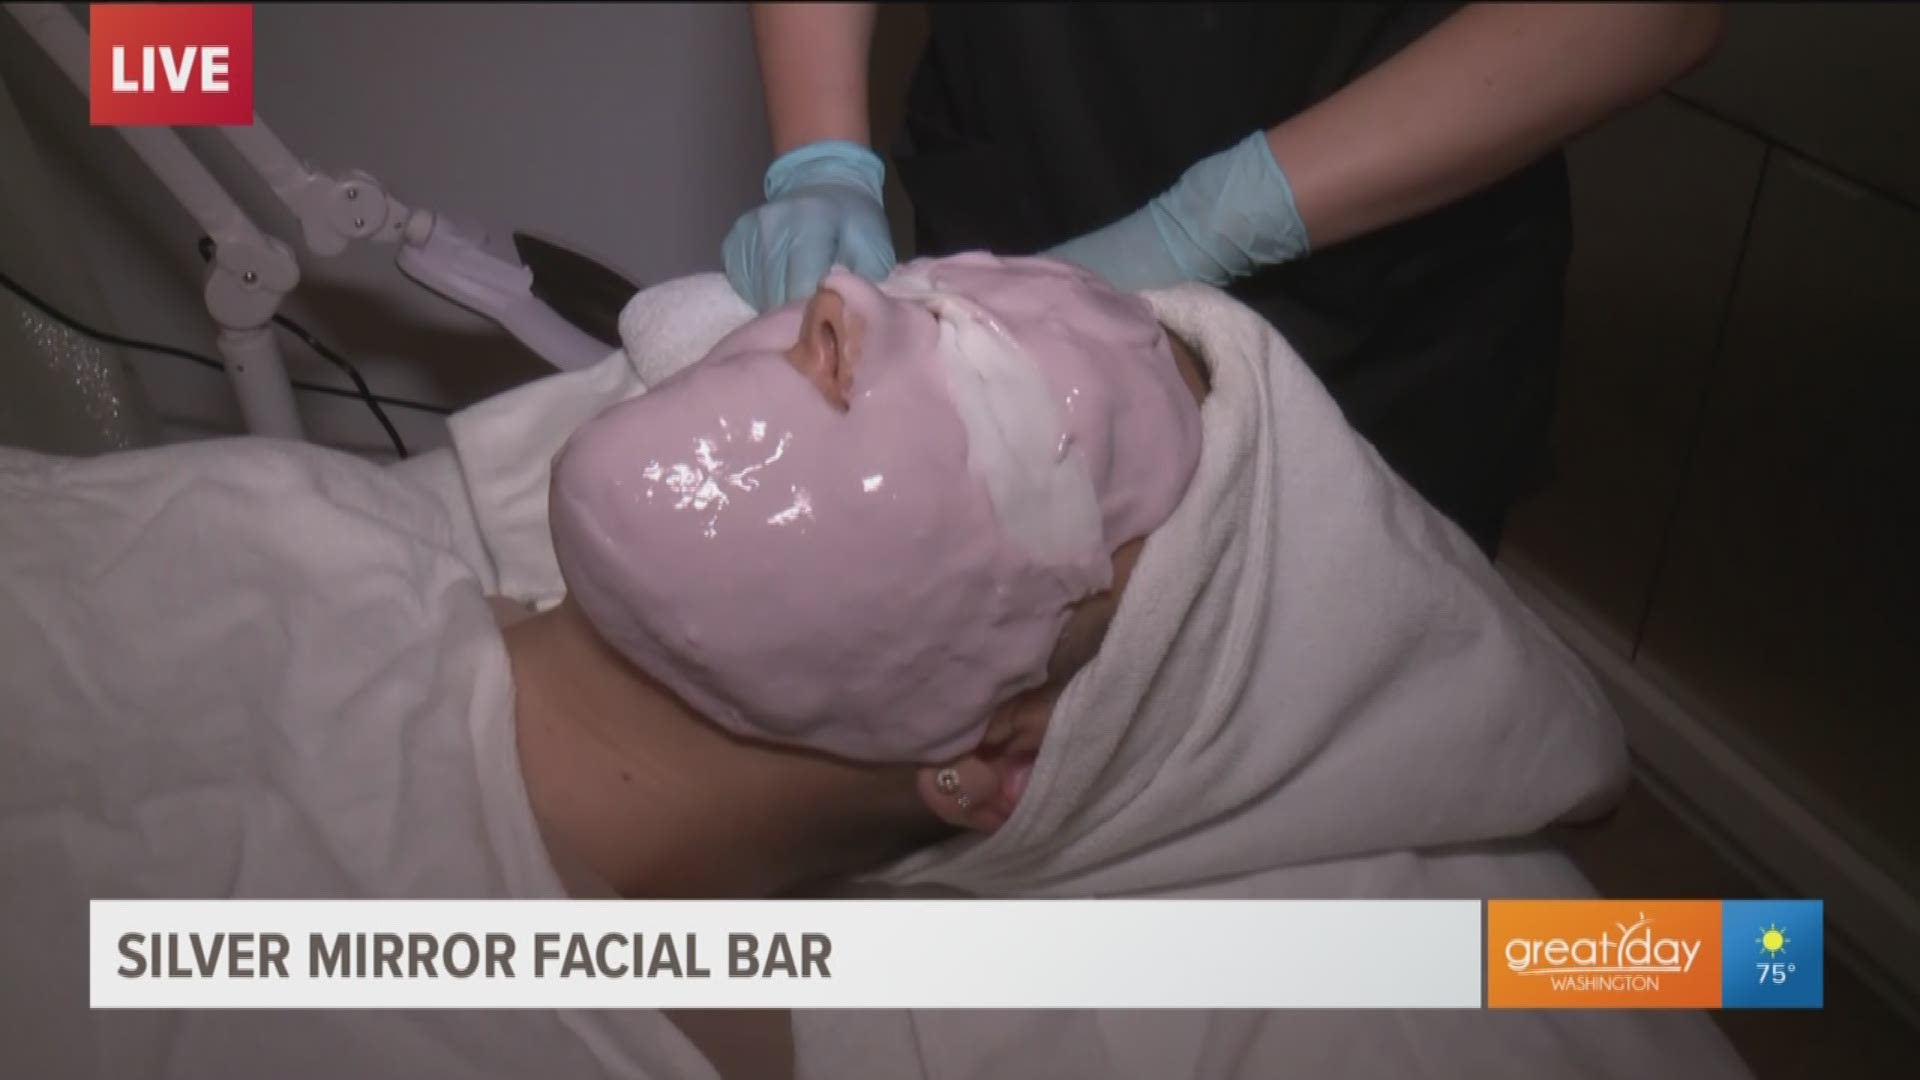 Take care of your face with a facial from Silver Mirror.